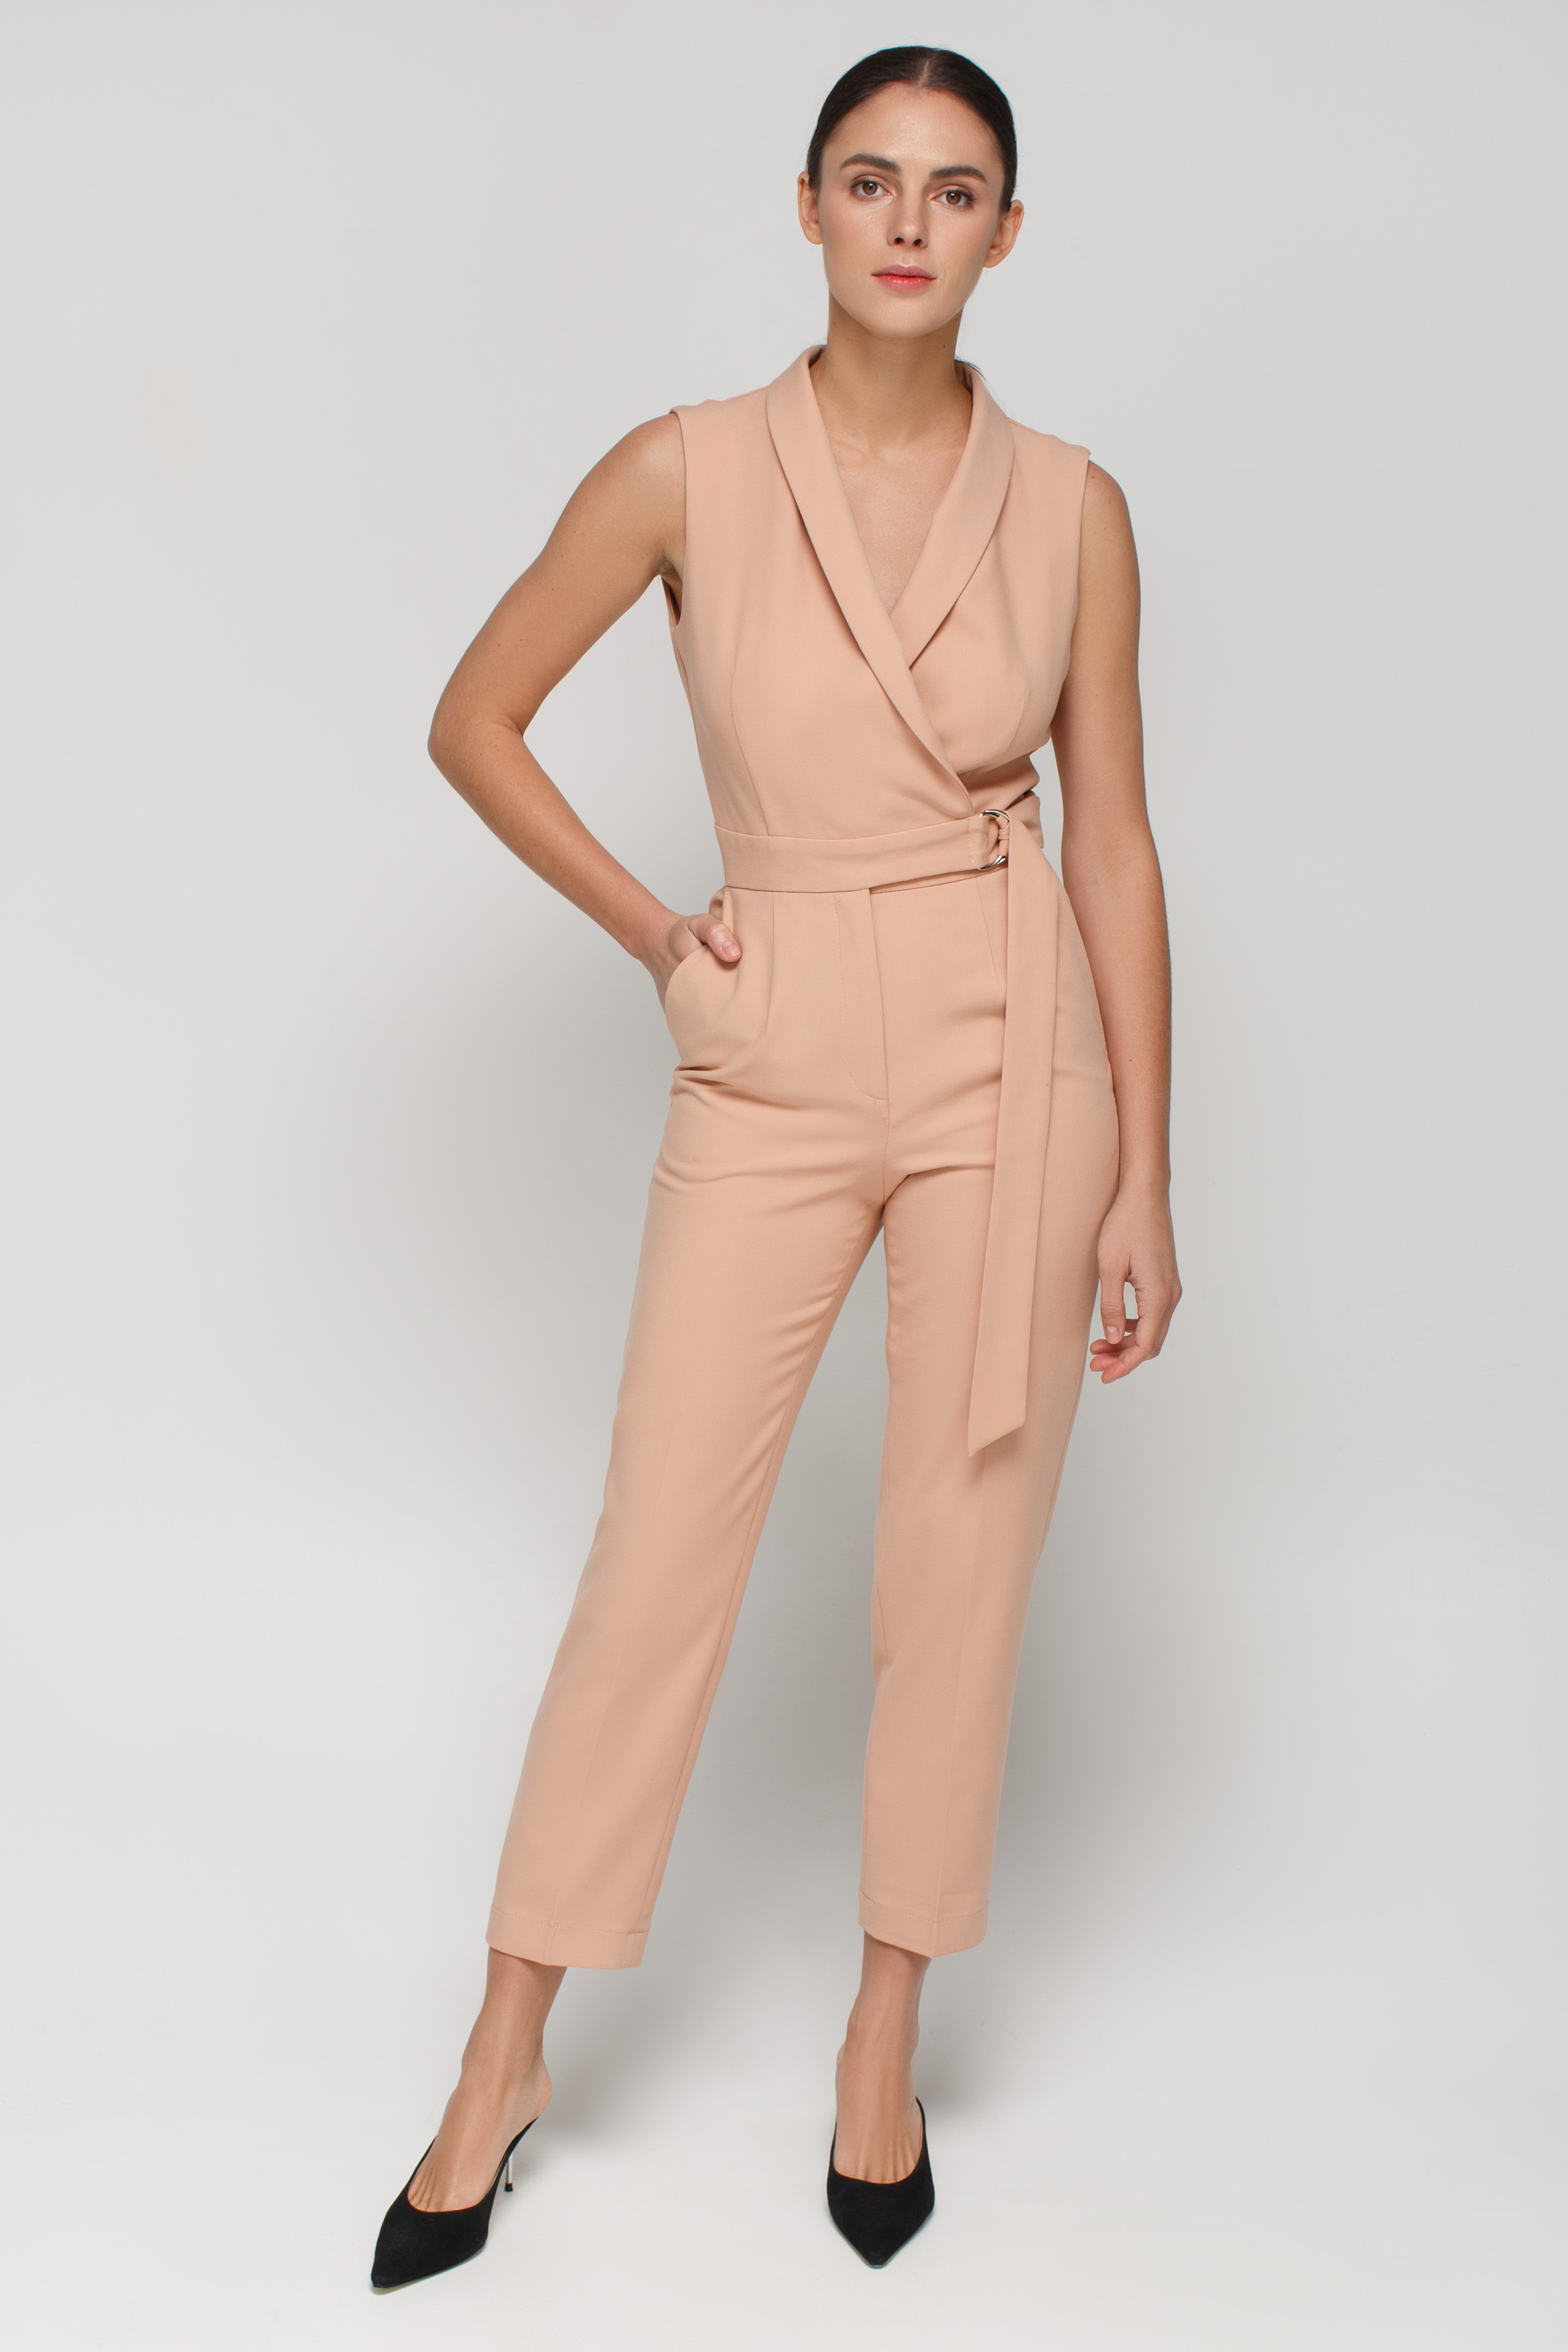 Beige jumpsuit with belt and shawl collar, photo 2